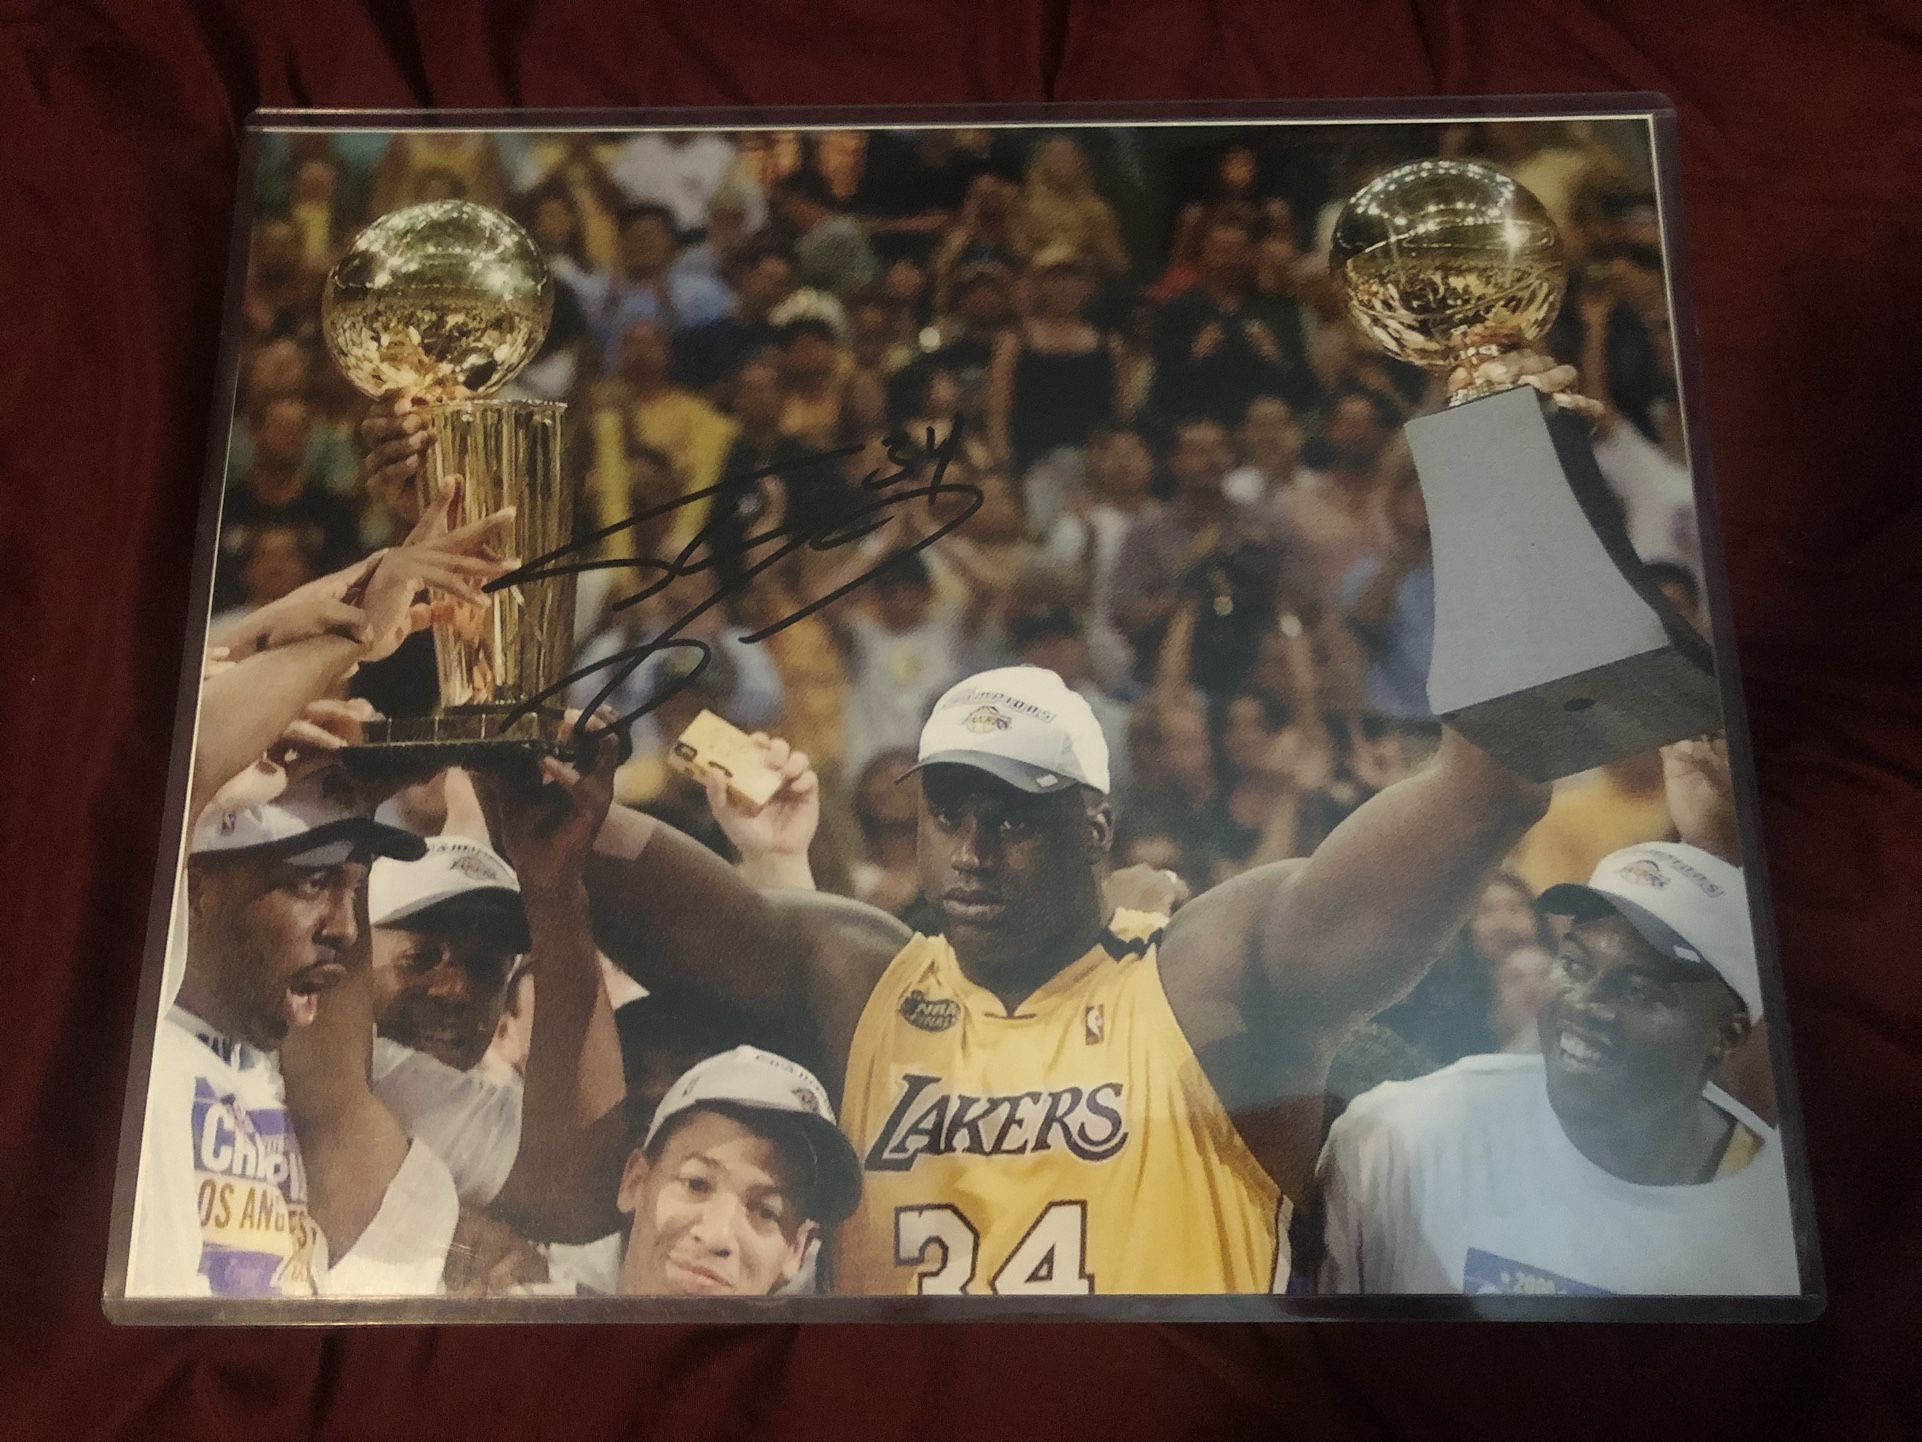 Shaquille O’Neal Signed 11x14 Photo, Lakers